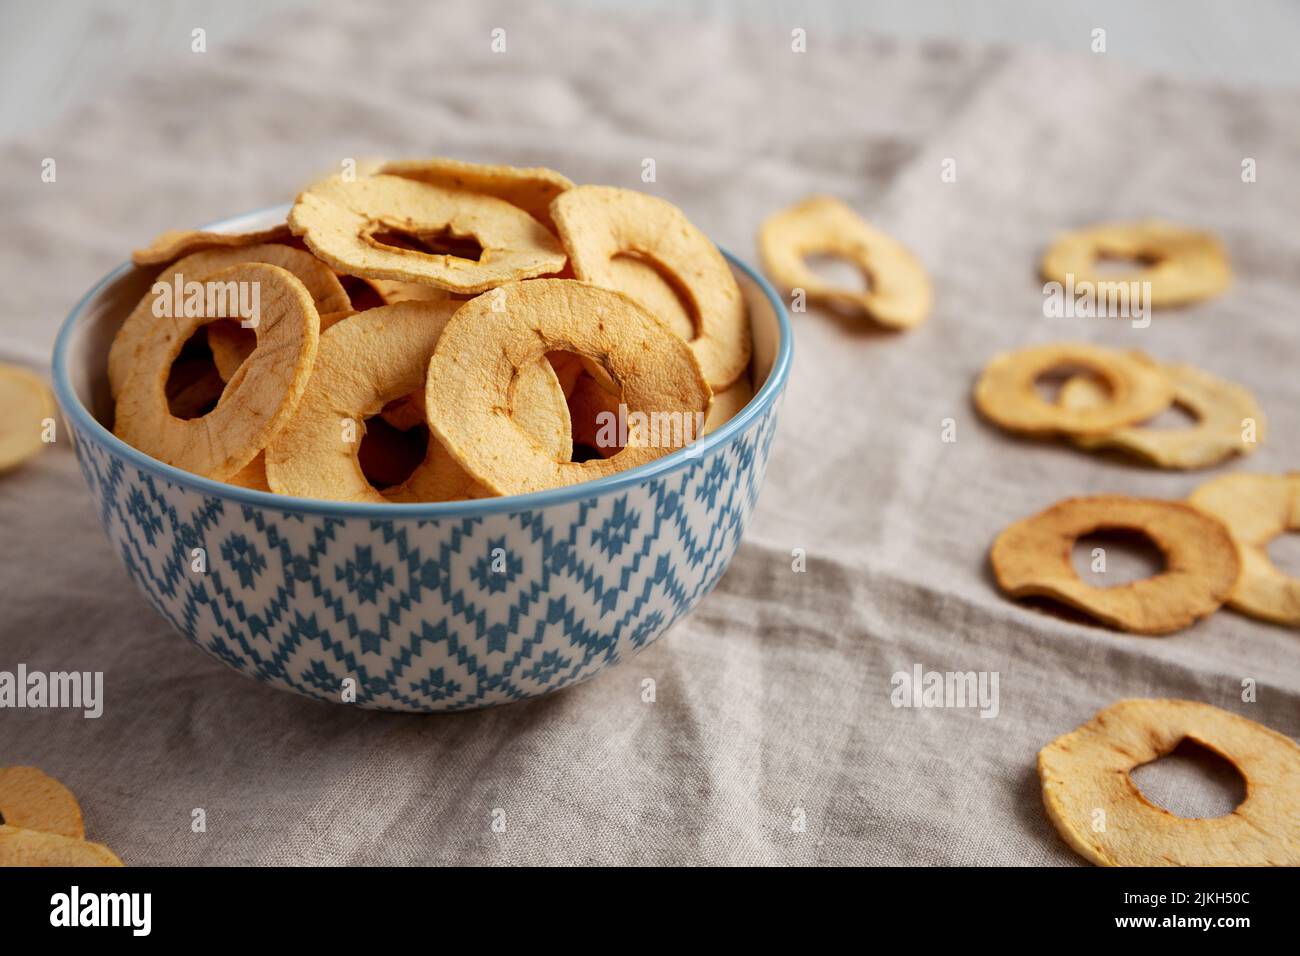 Homemade apple chips in a bowl, side view. Stock Photo